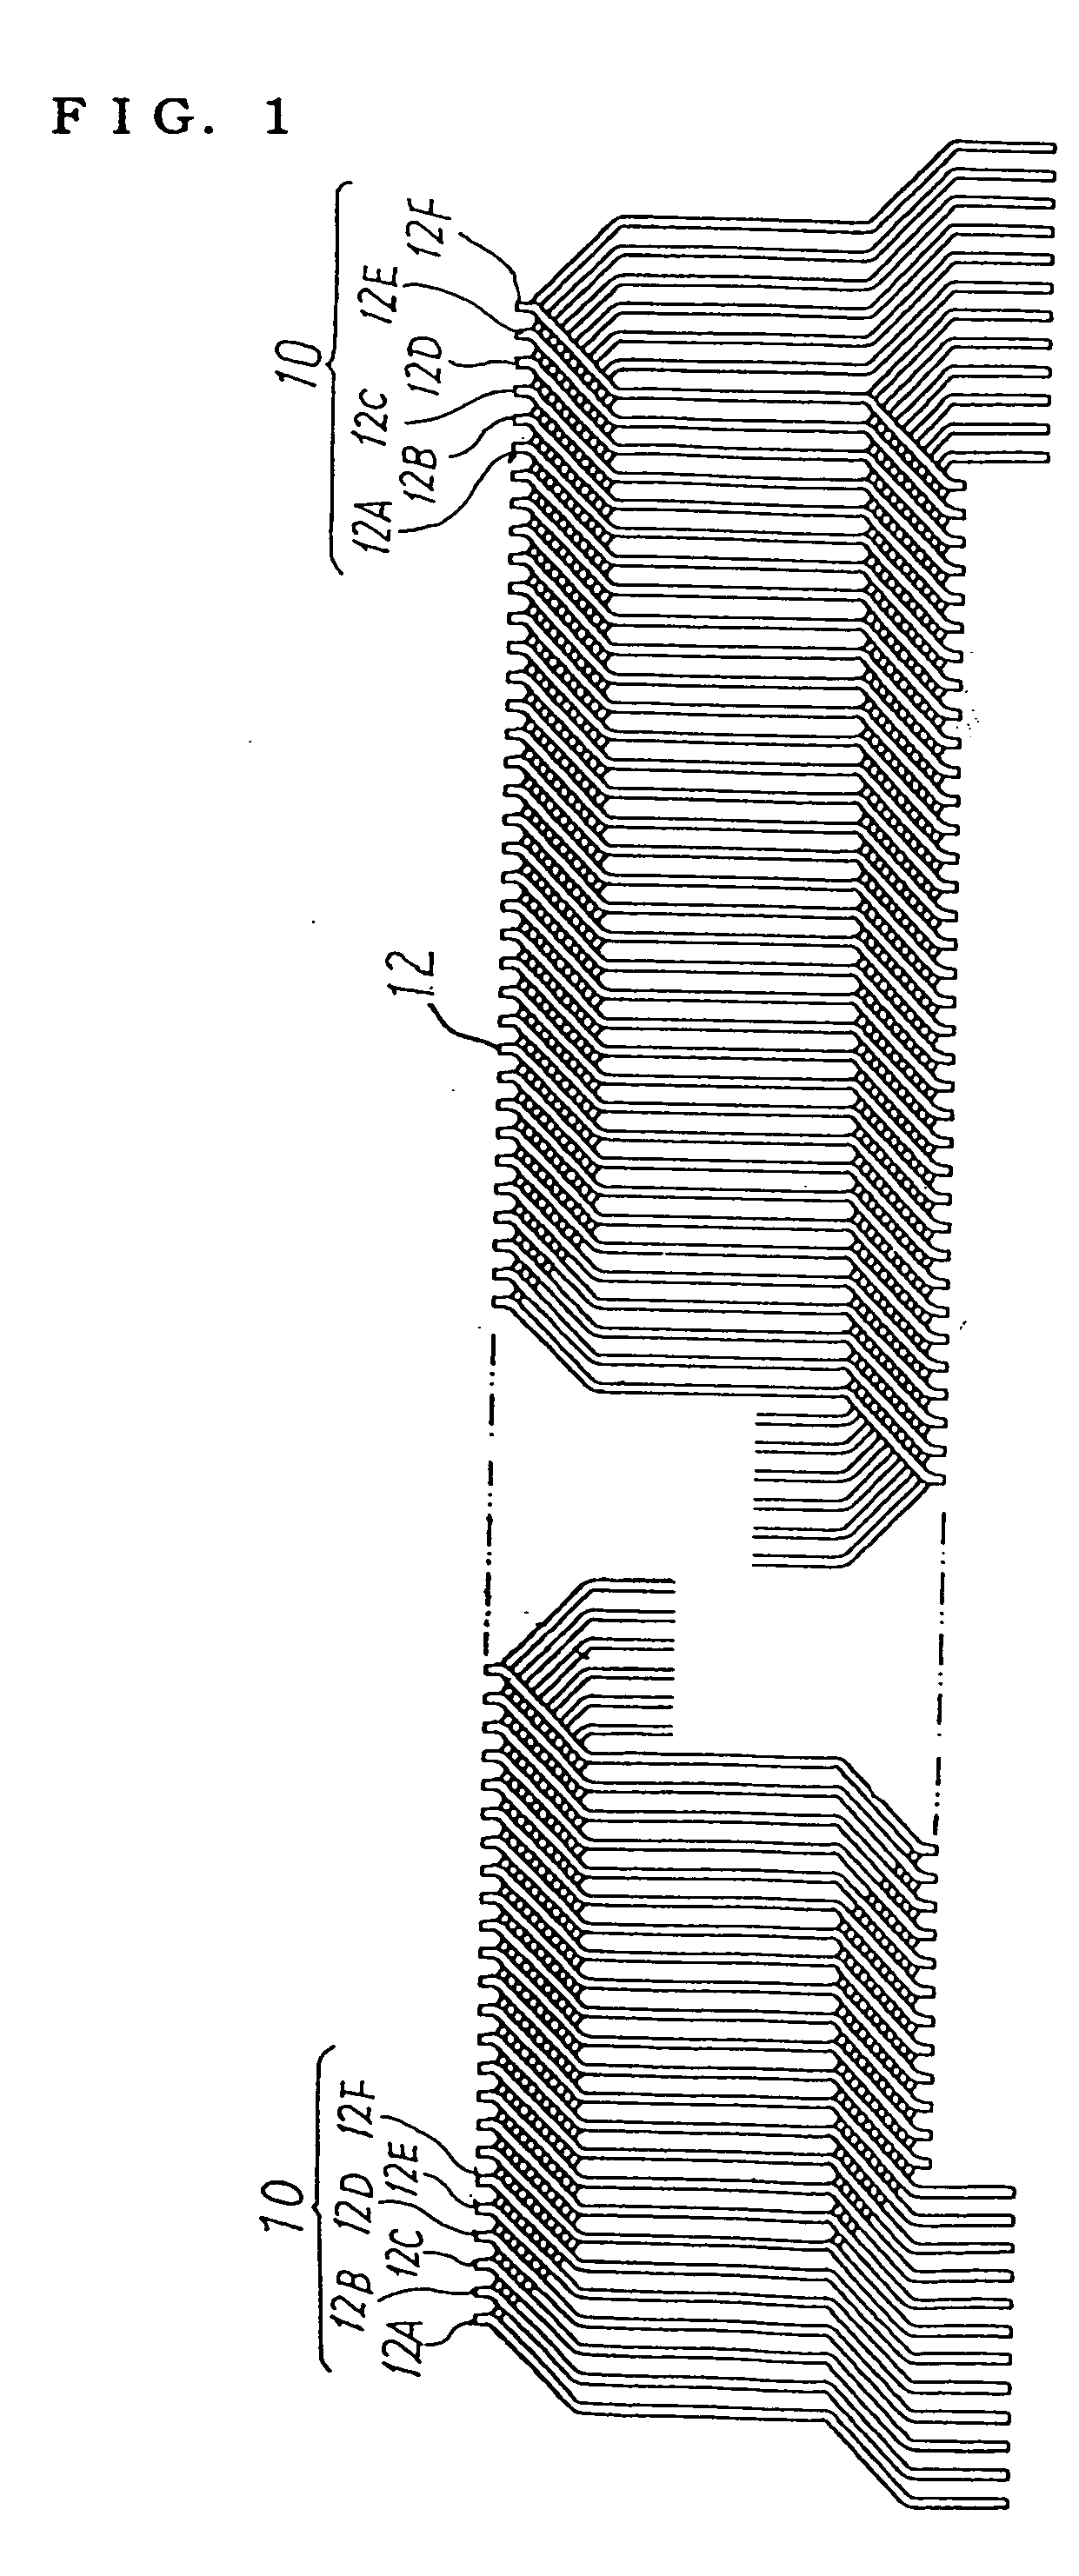 Manufacturing method of a coil assembly